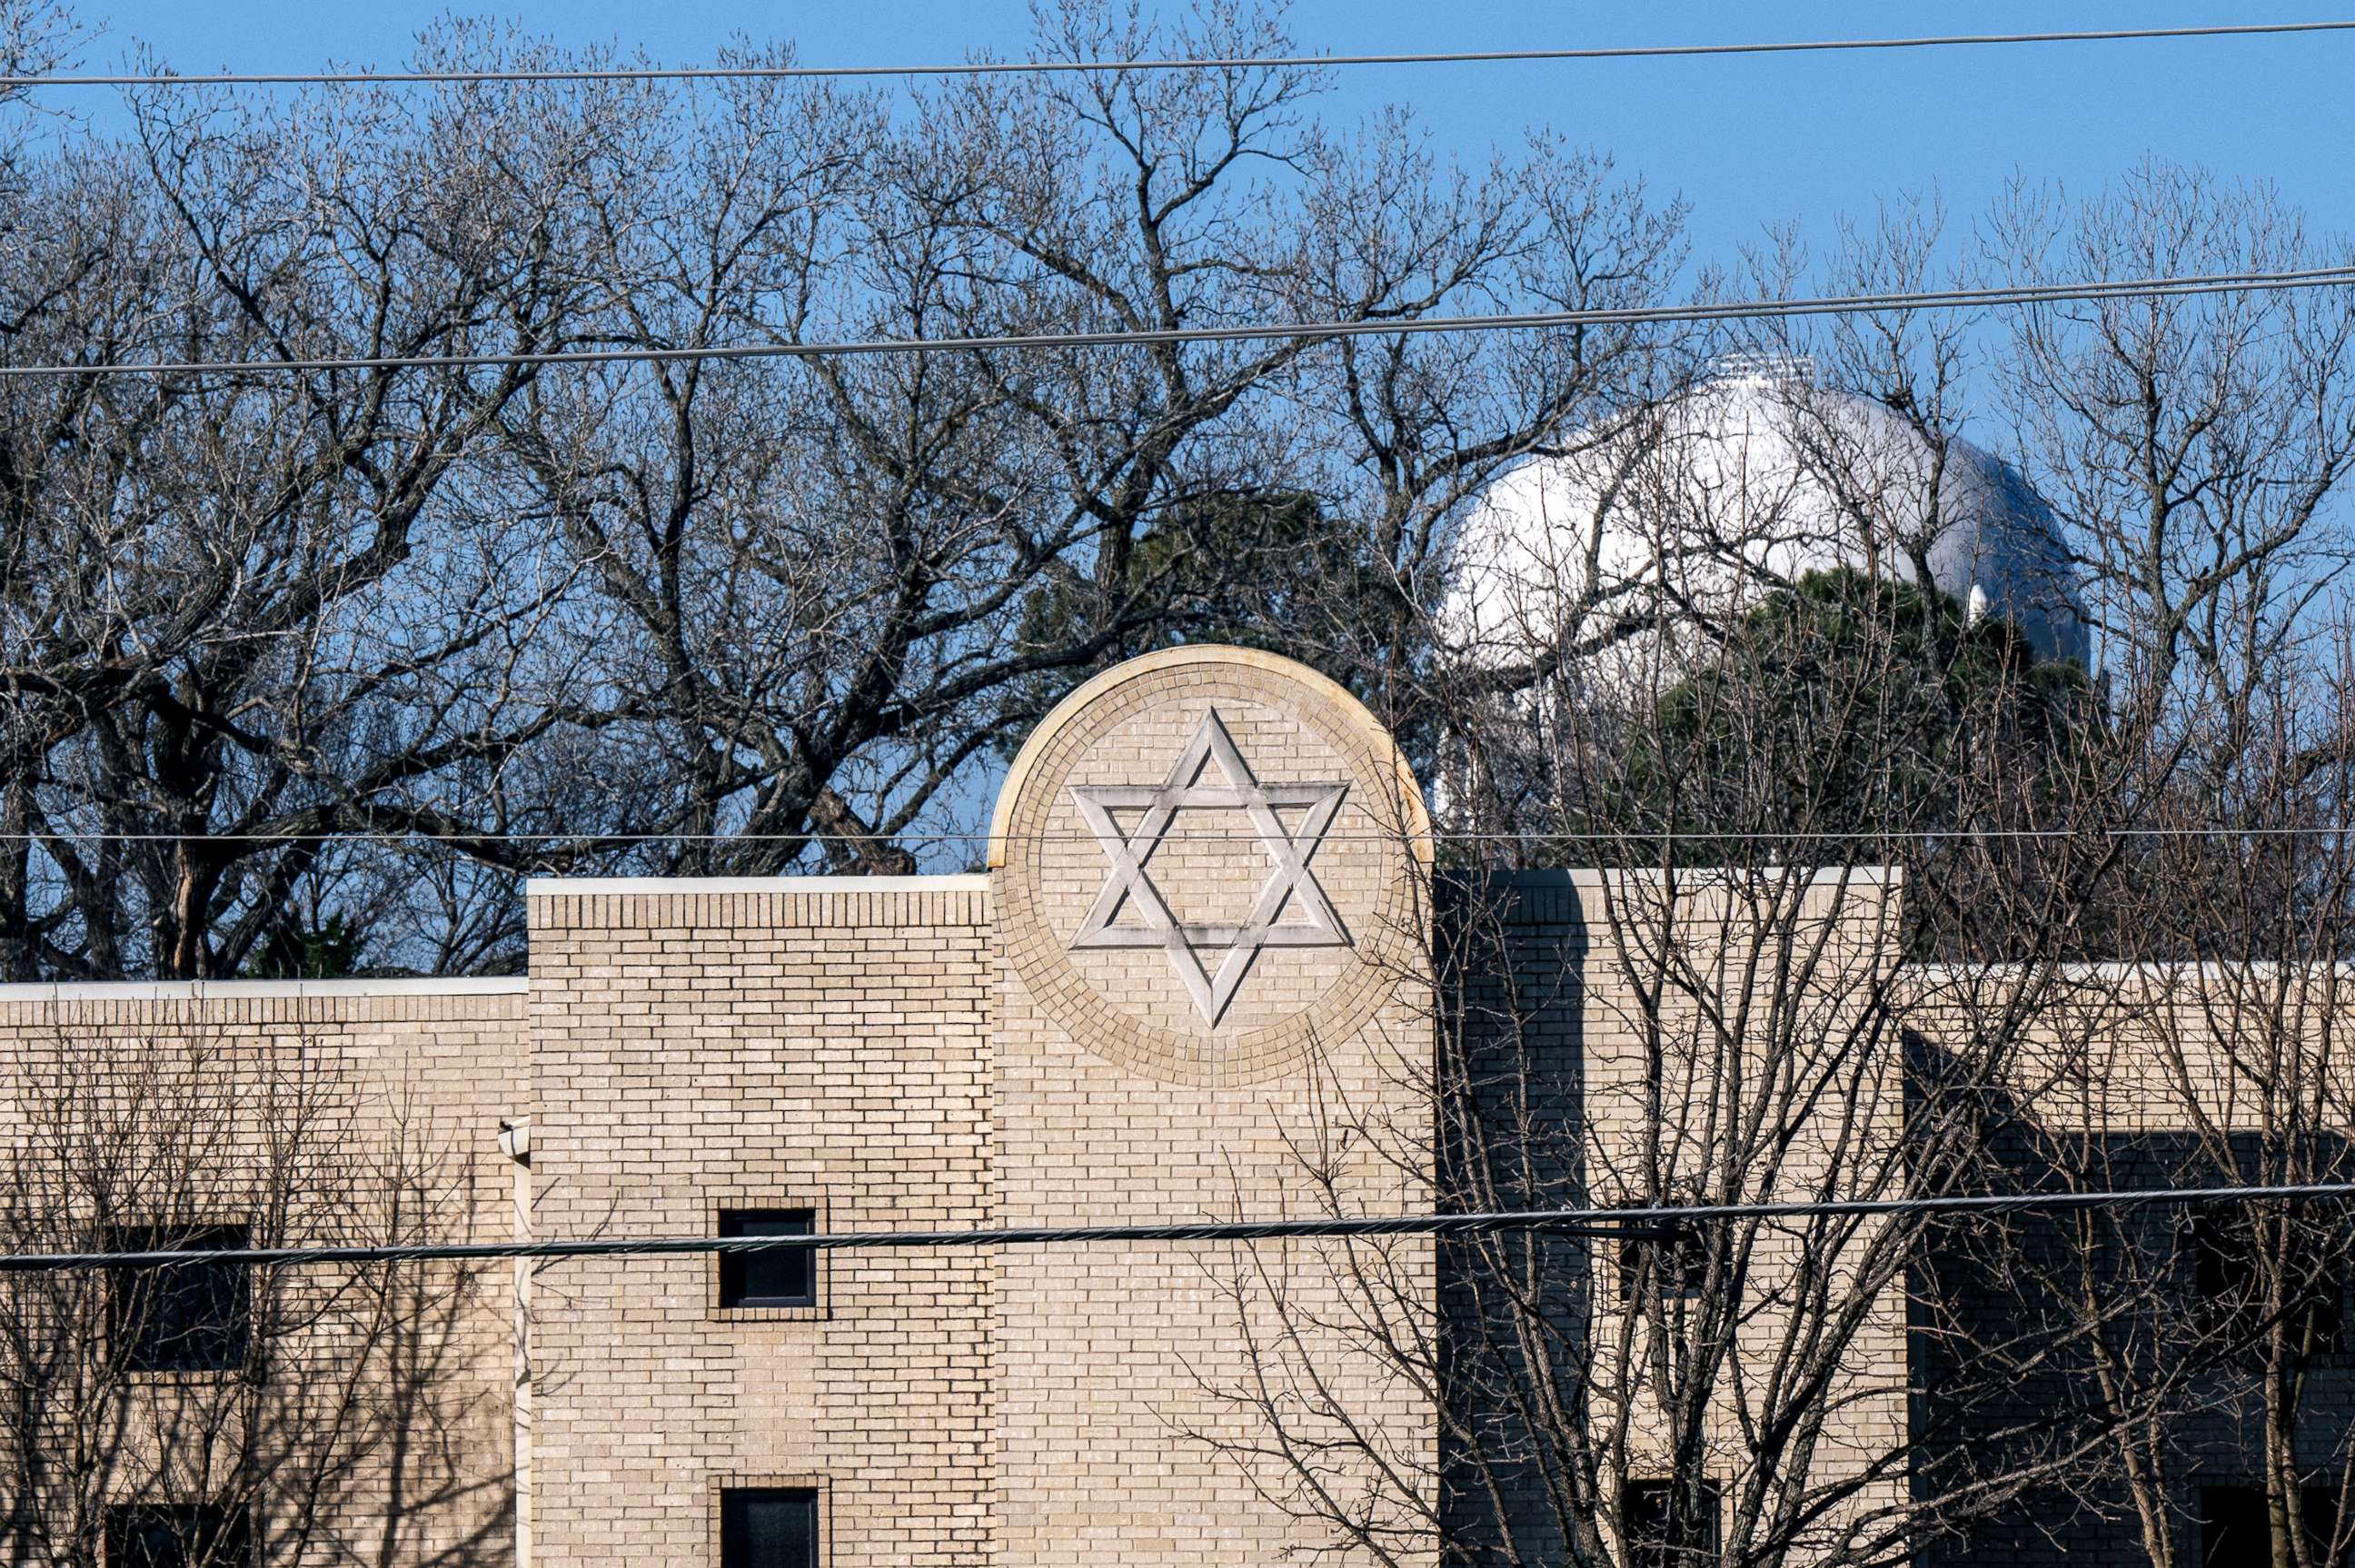 PHOTO: The Congregation Beth Israel synagogue is seen on Jan. 16, 2022 in Colleyville, Texas. All four people who were held hostage at the synagogue have been safely released after more than 10 hours of being held captive by a gunman.